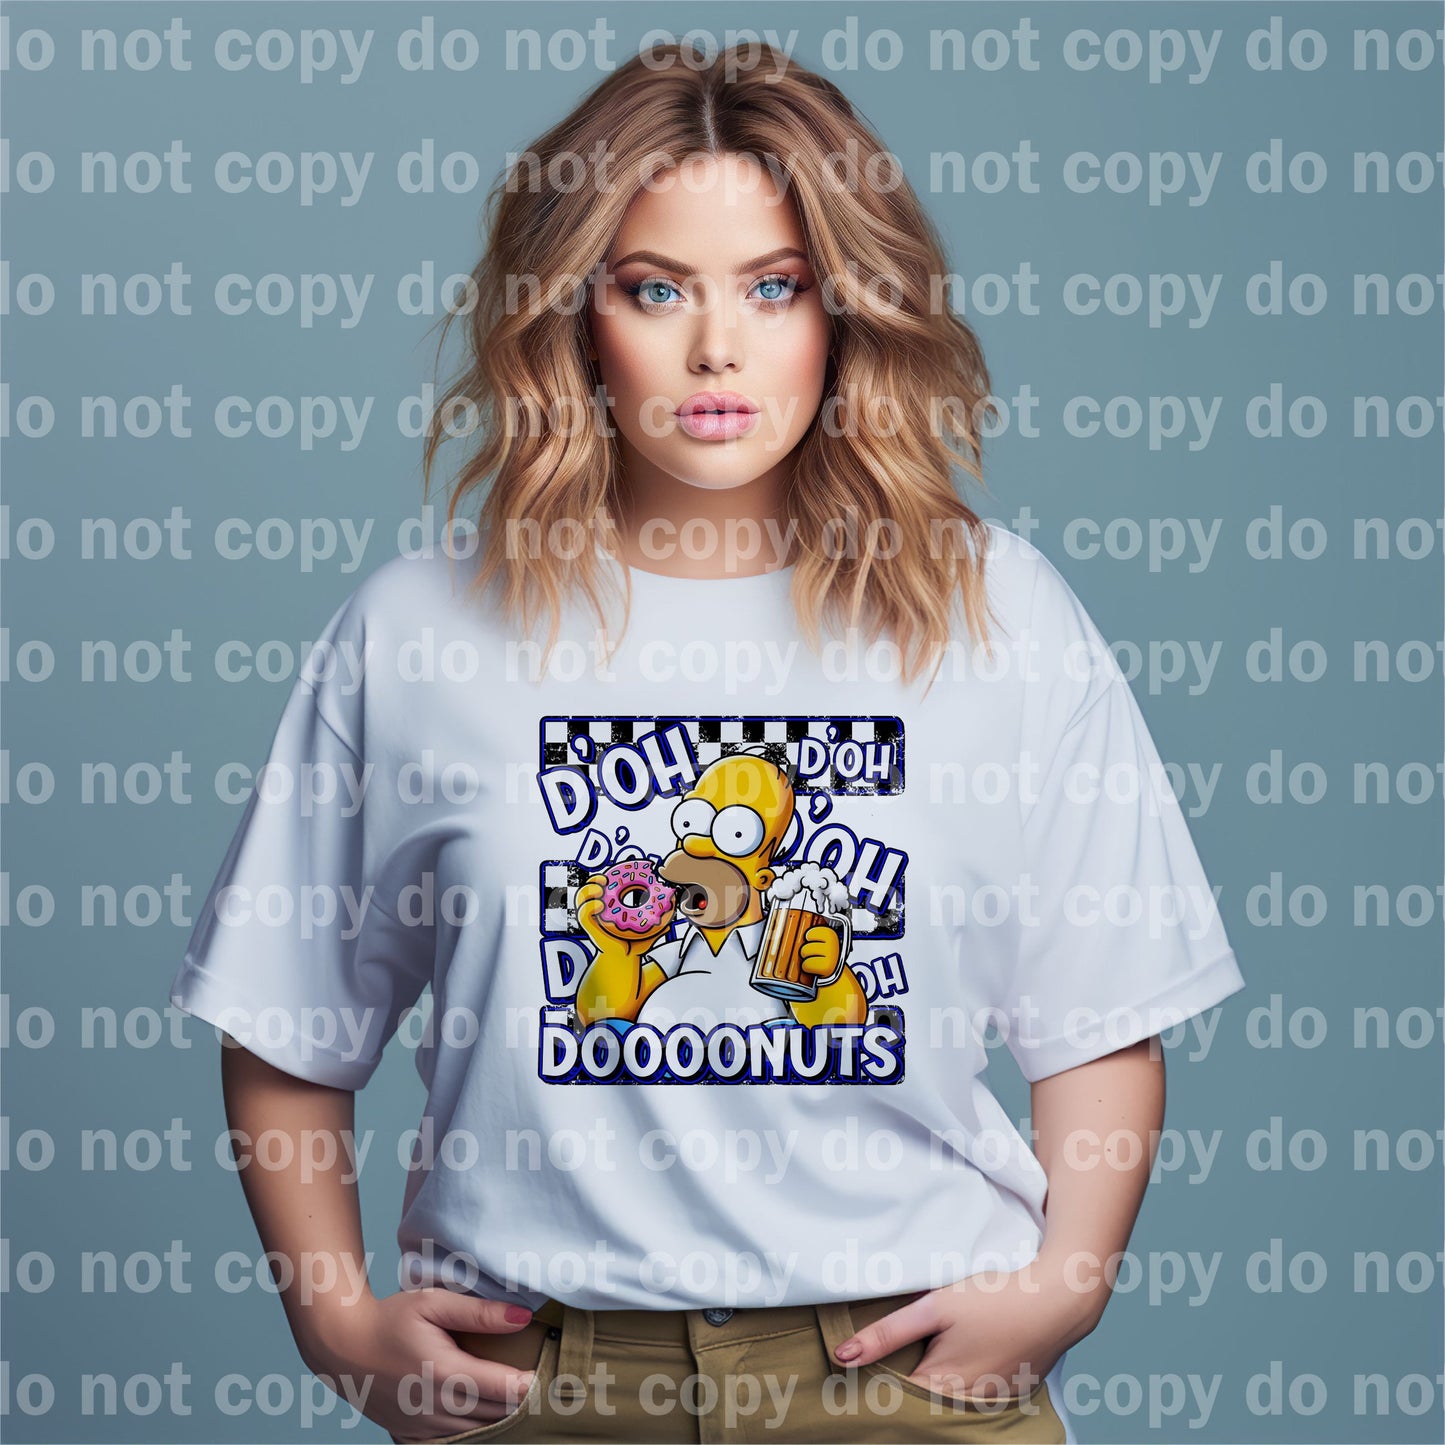 Doh Doh Doh Donuts Dream Print or Sublimation Print